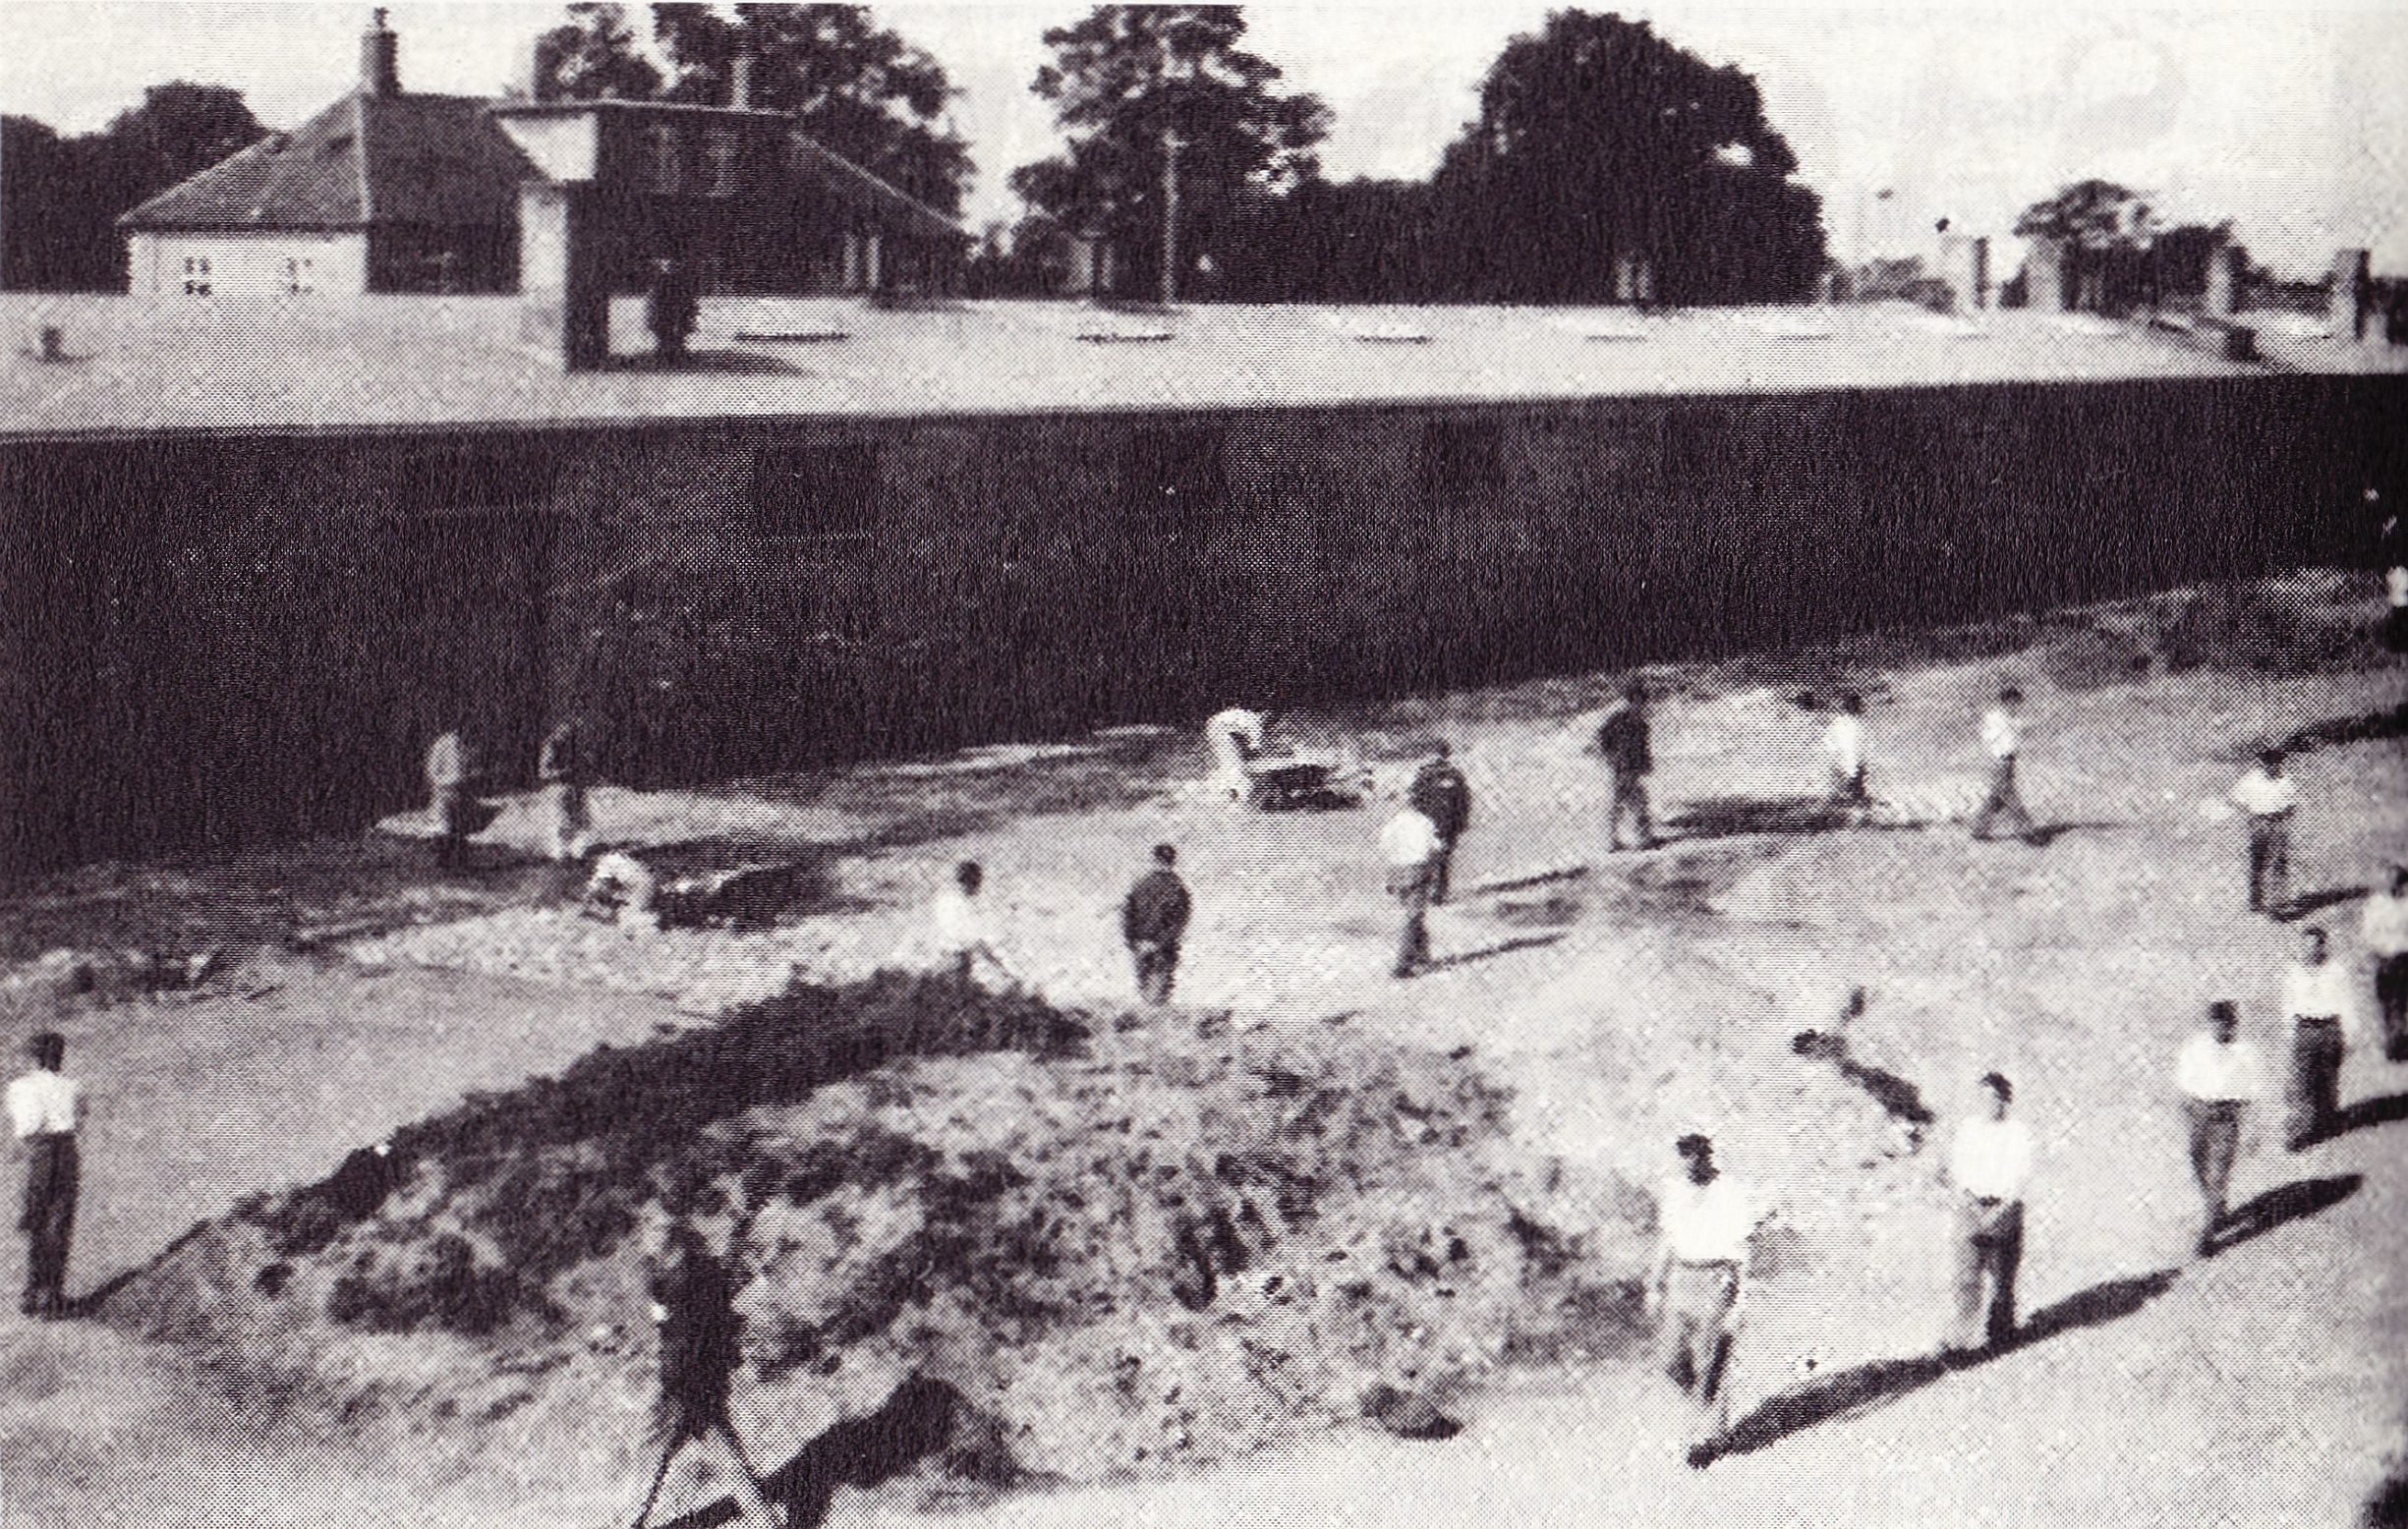 Vridsløselille State Prison yard in the early 1940s, when several Wollweber Leage members were imprisoned there, half a century before the Blekingegade Group members.